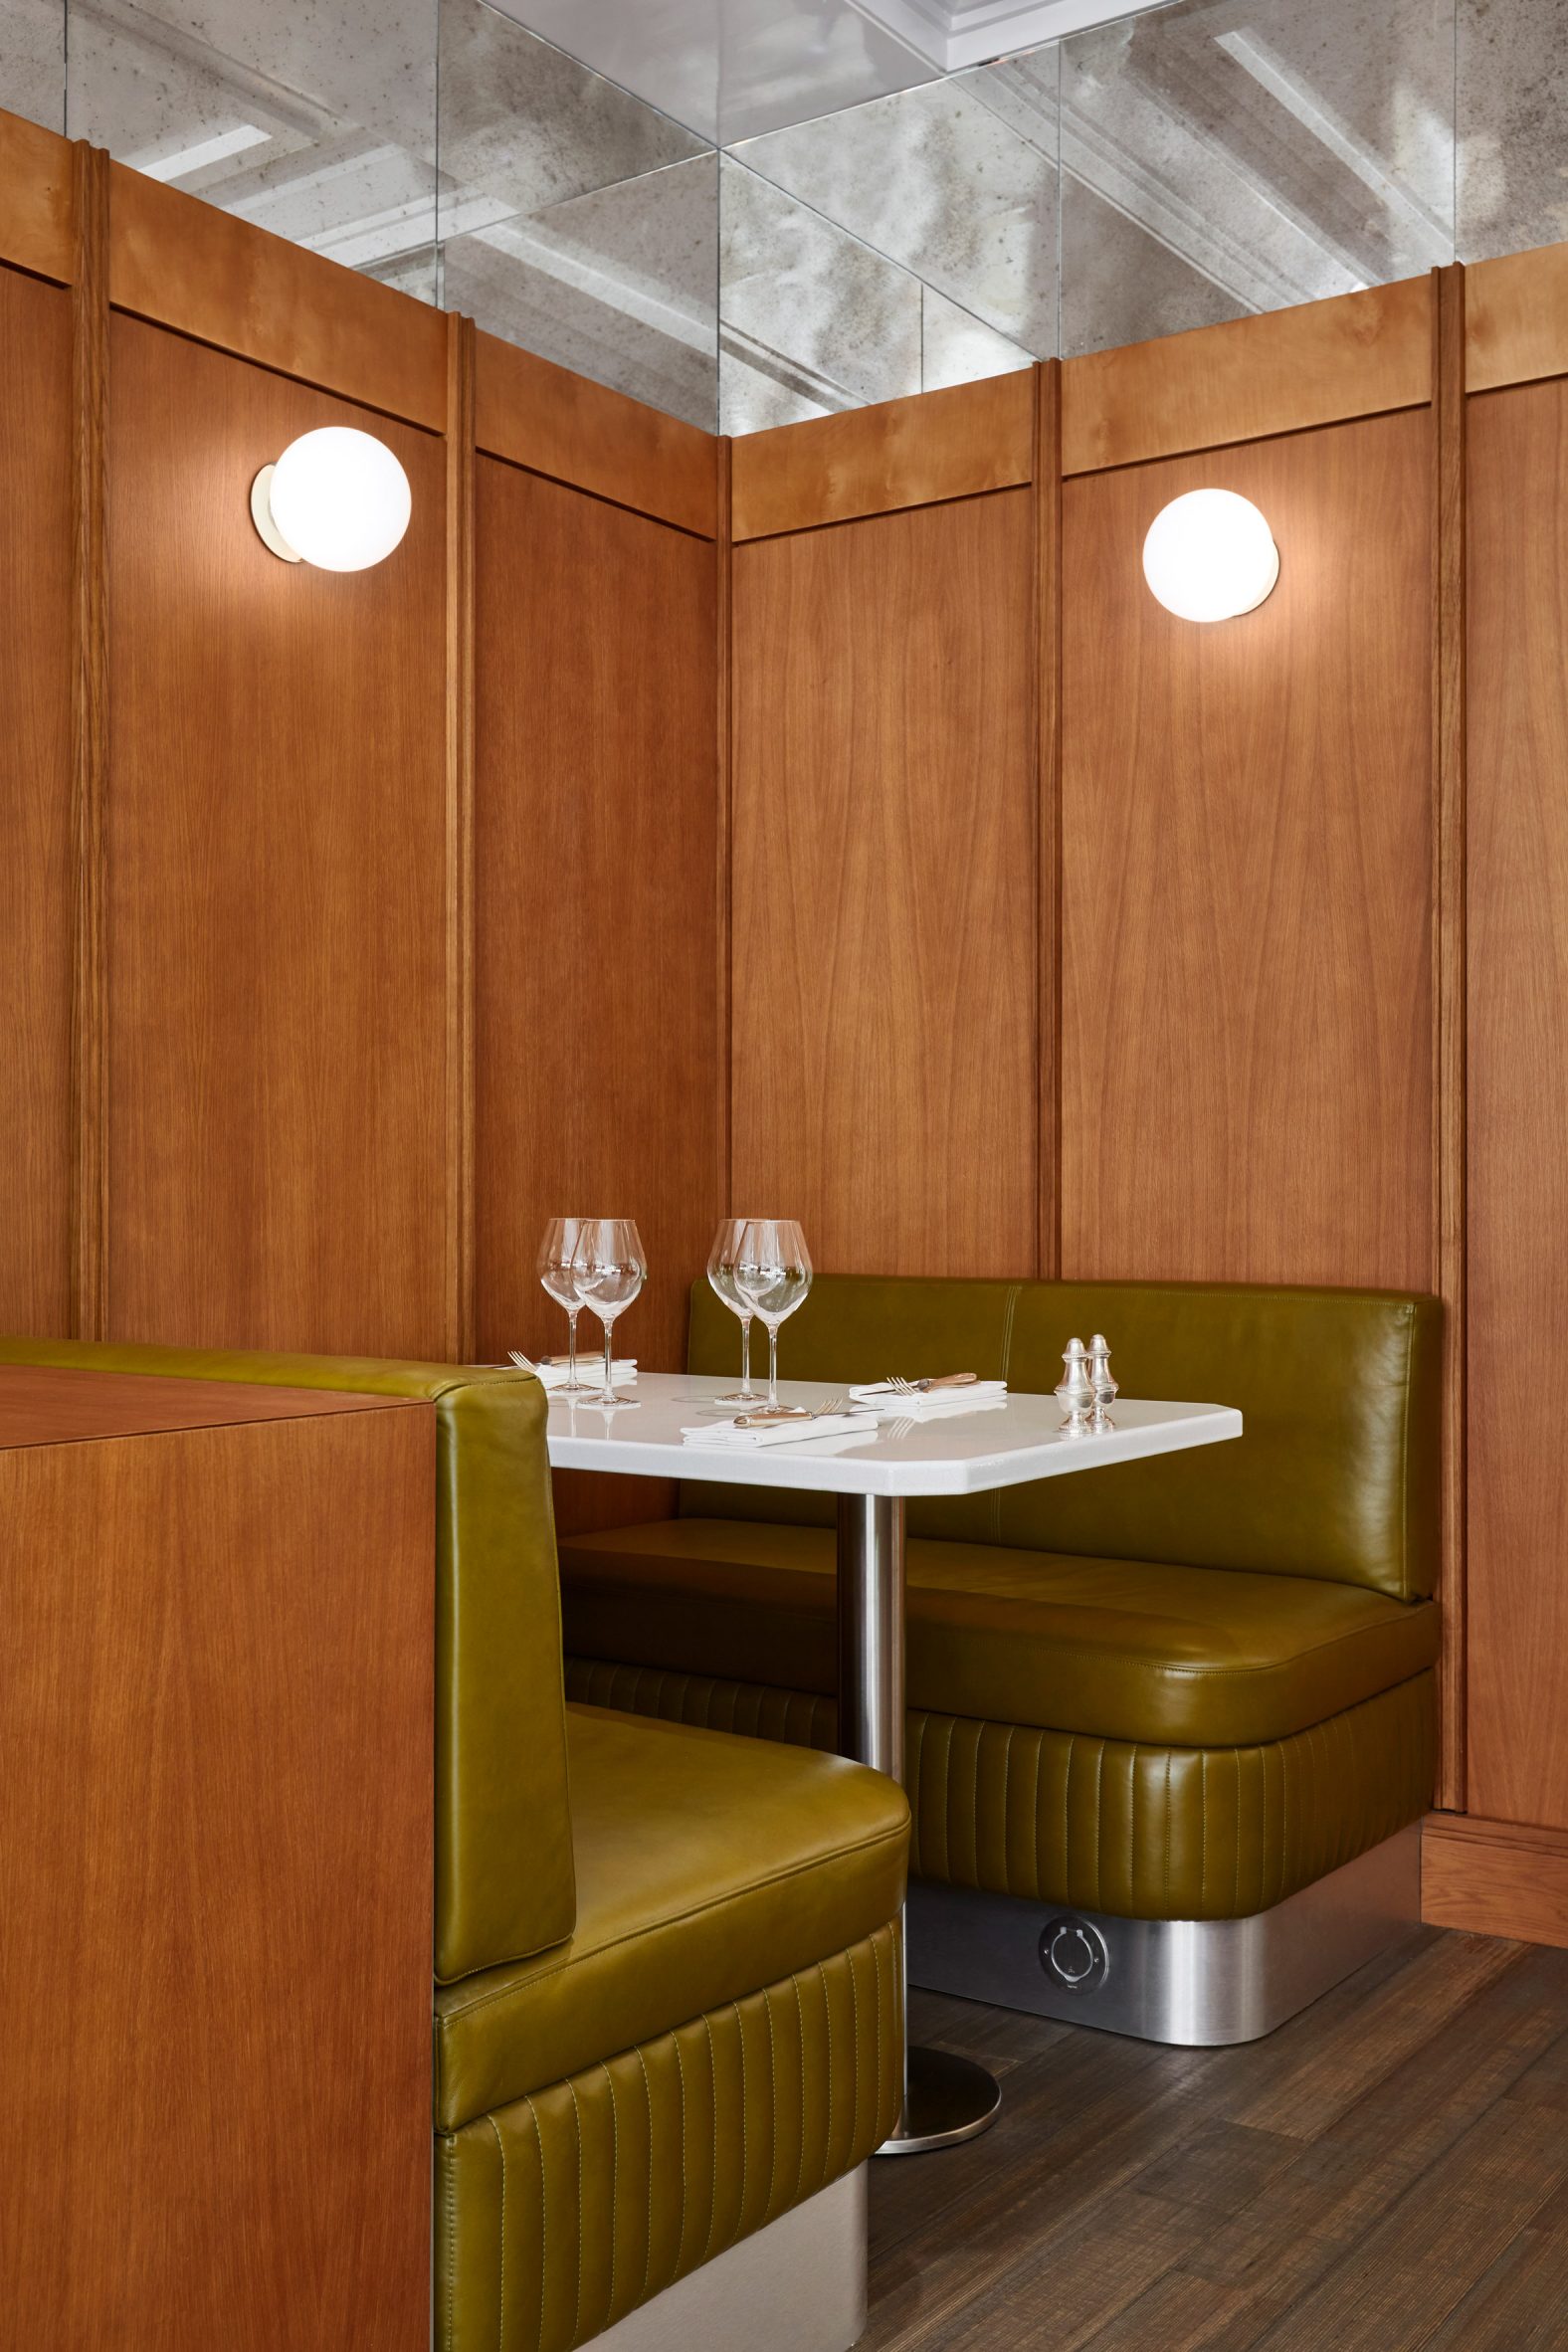 Wood panelling with leather booth and spherical lights in restaurant interior by Lizée-Hugot